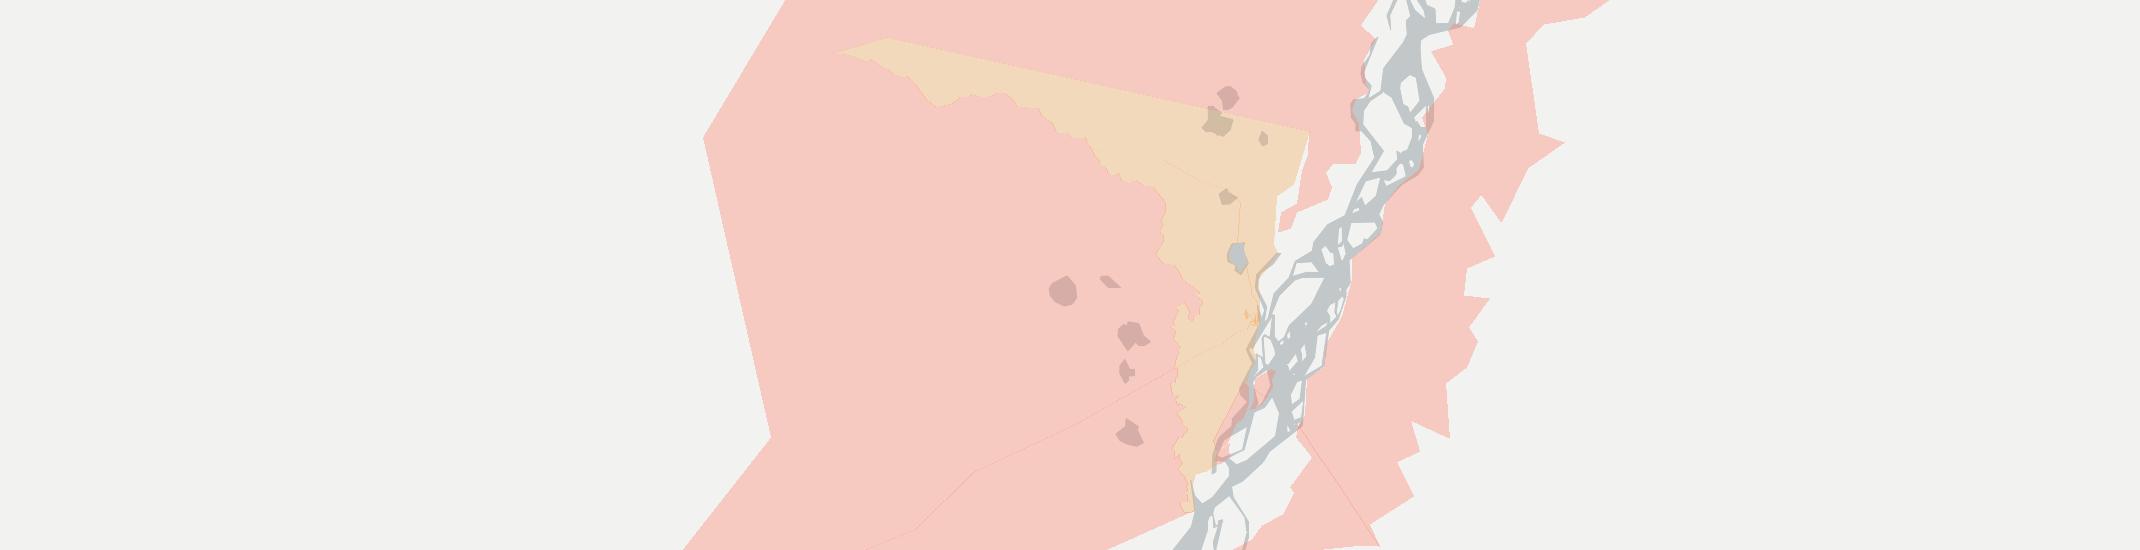 Noatak Internet Competition Map. Click for interactive map.